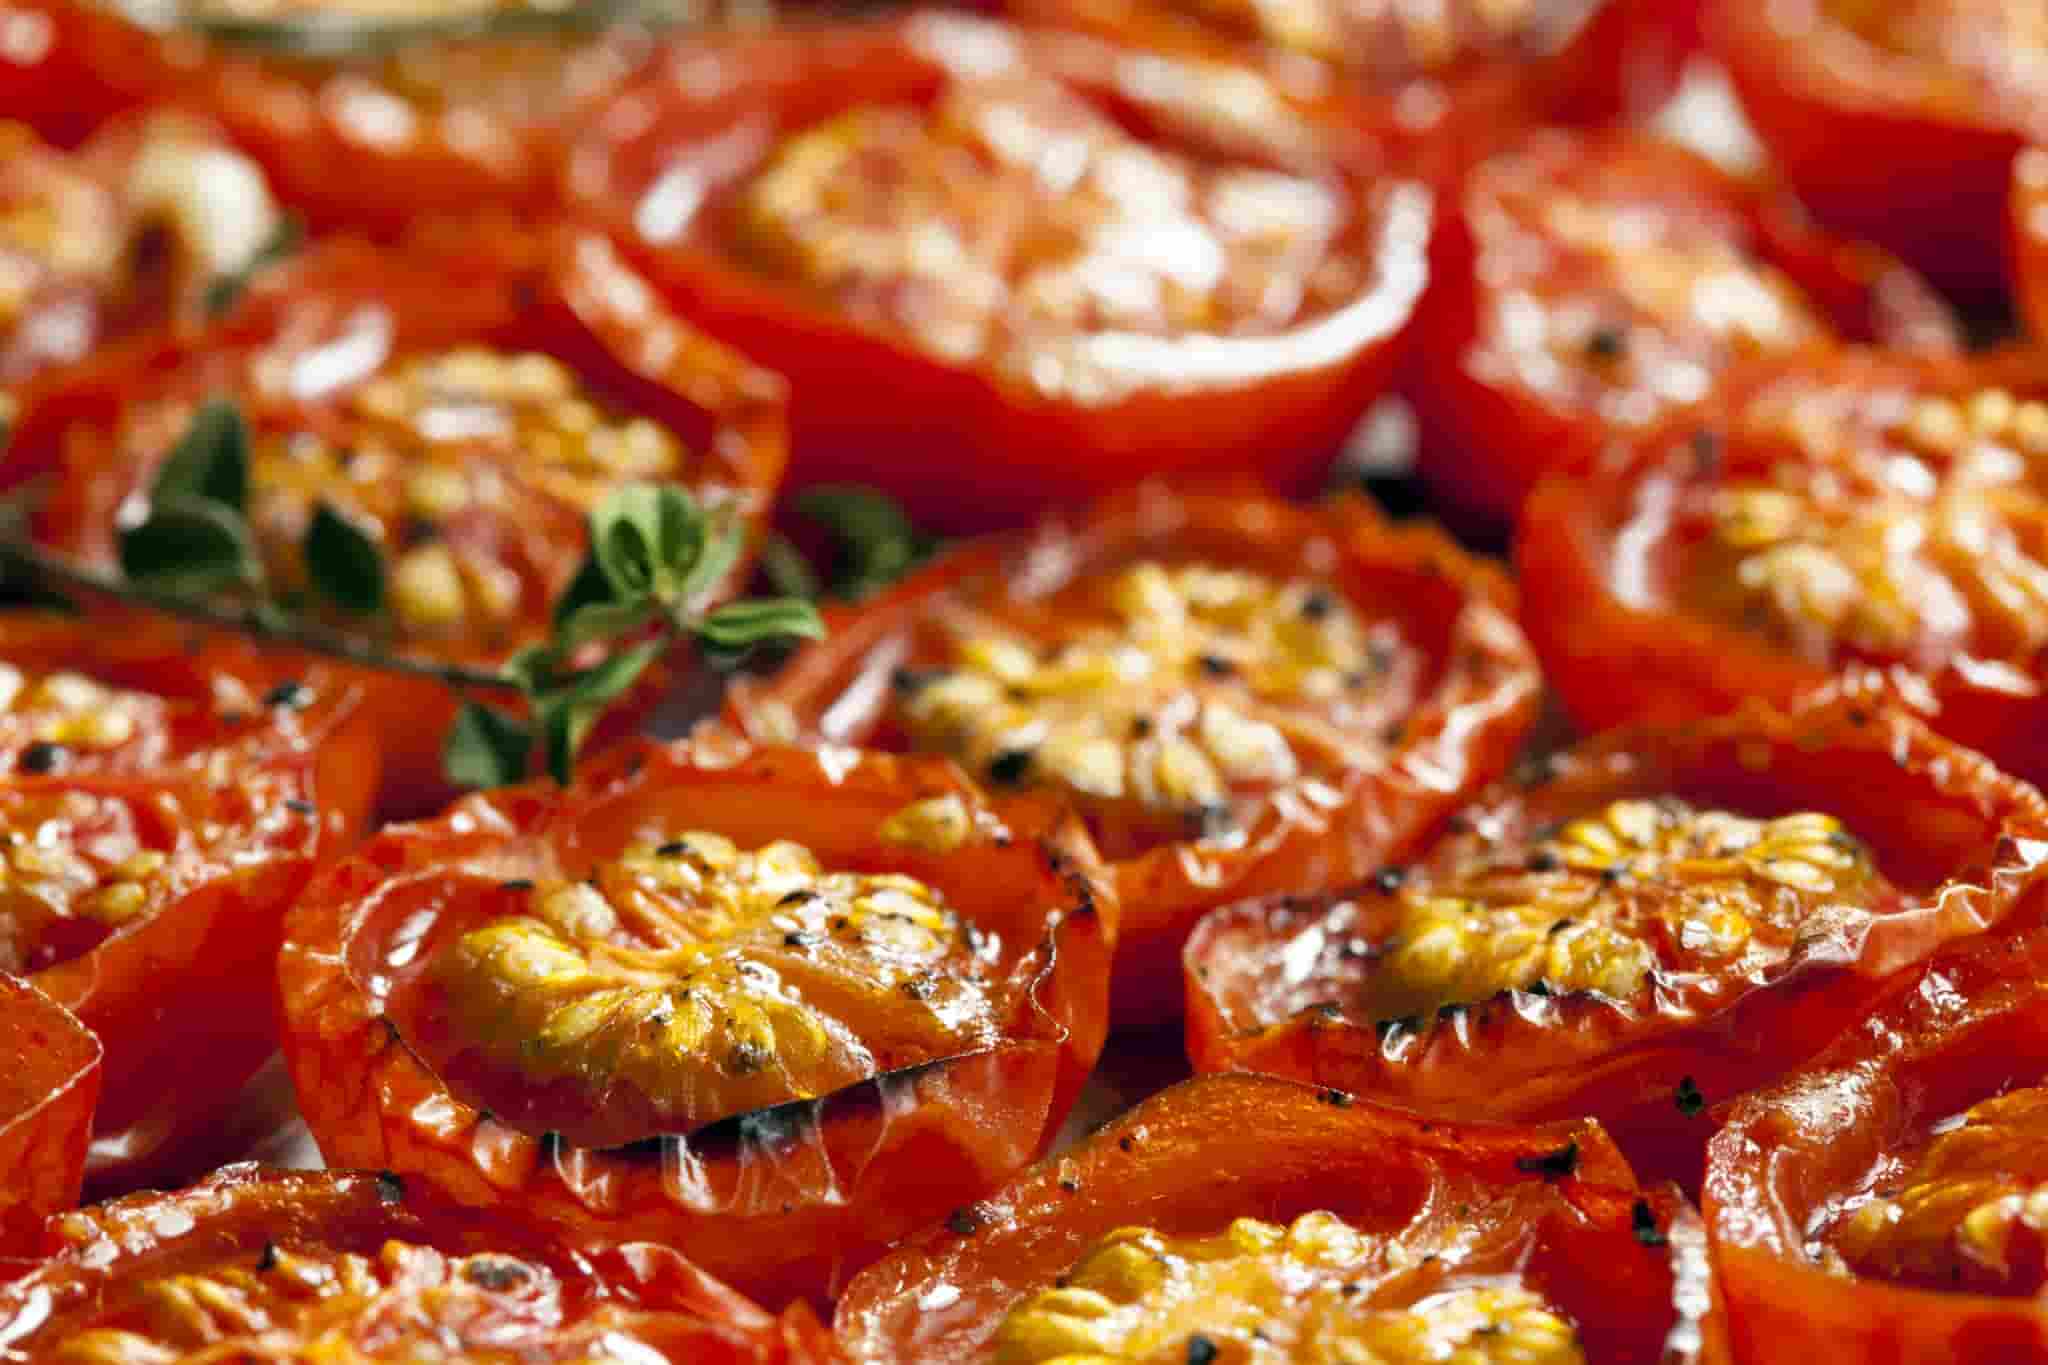 Roasted tomatoes and garlic